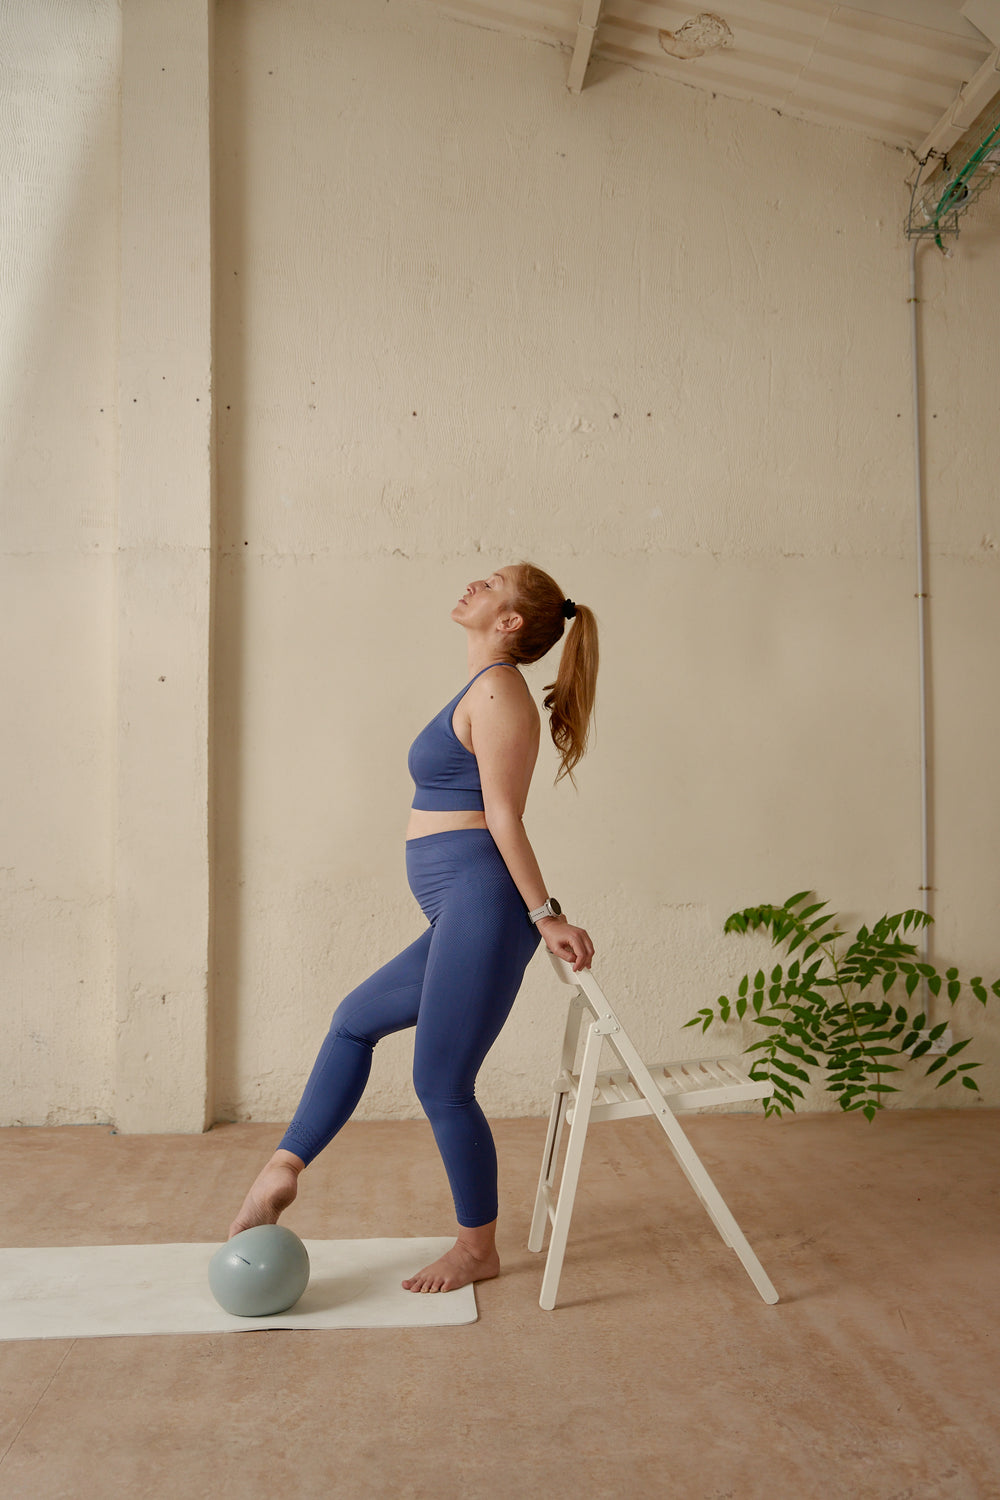 Barre Session: Barre express class suitable for pregnant women. III